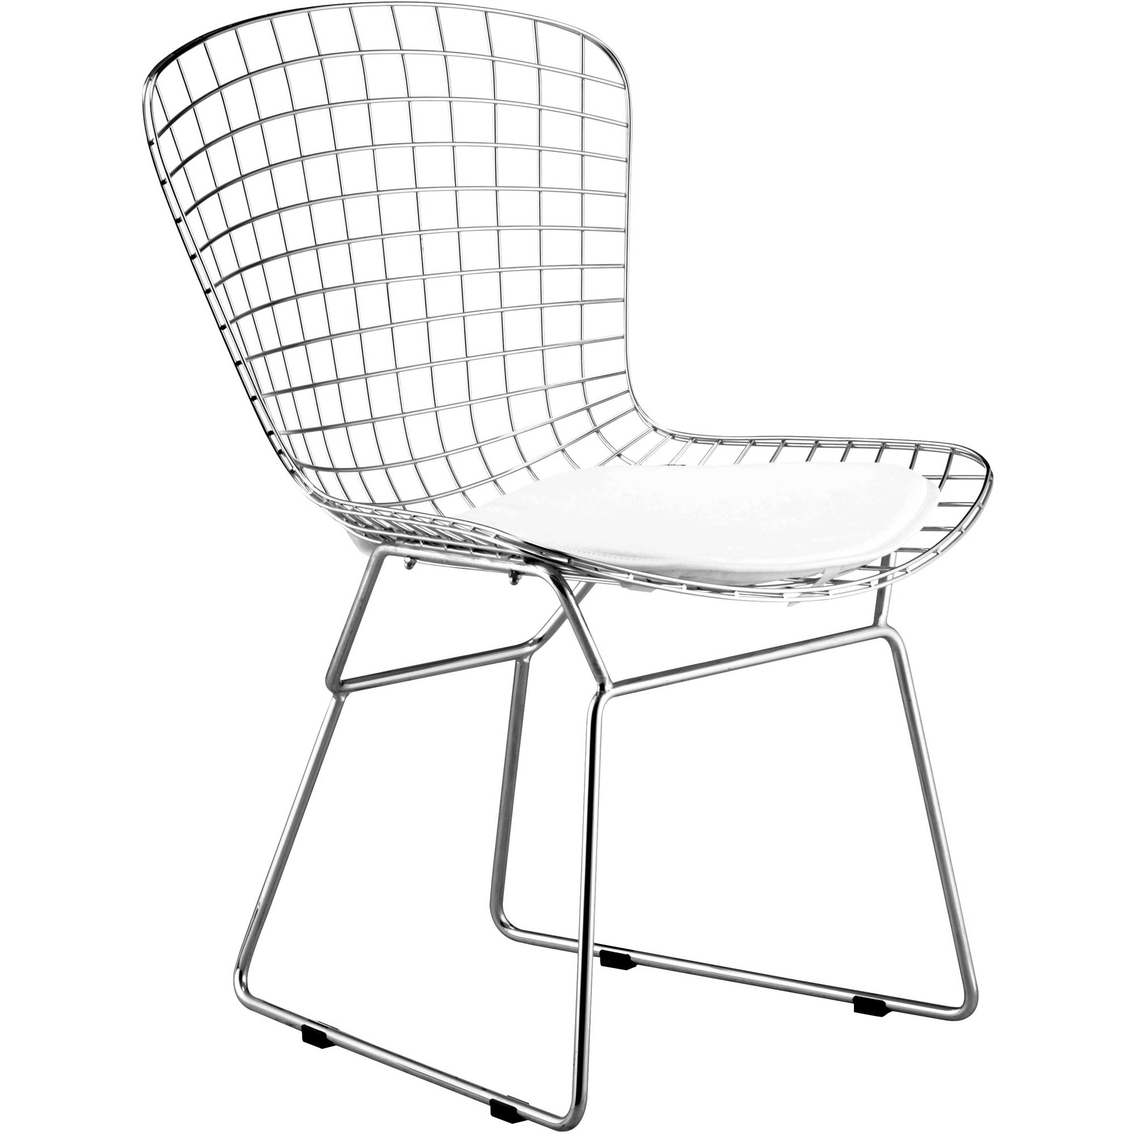 Zuo Modern Wire Dining Chair 2 Pc. Set - Image 3 of 4